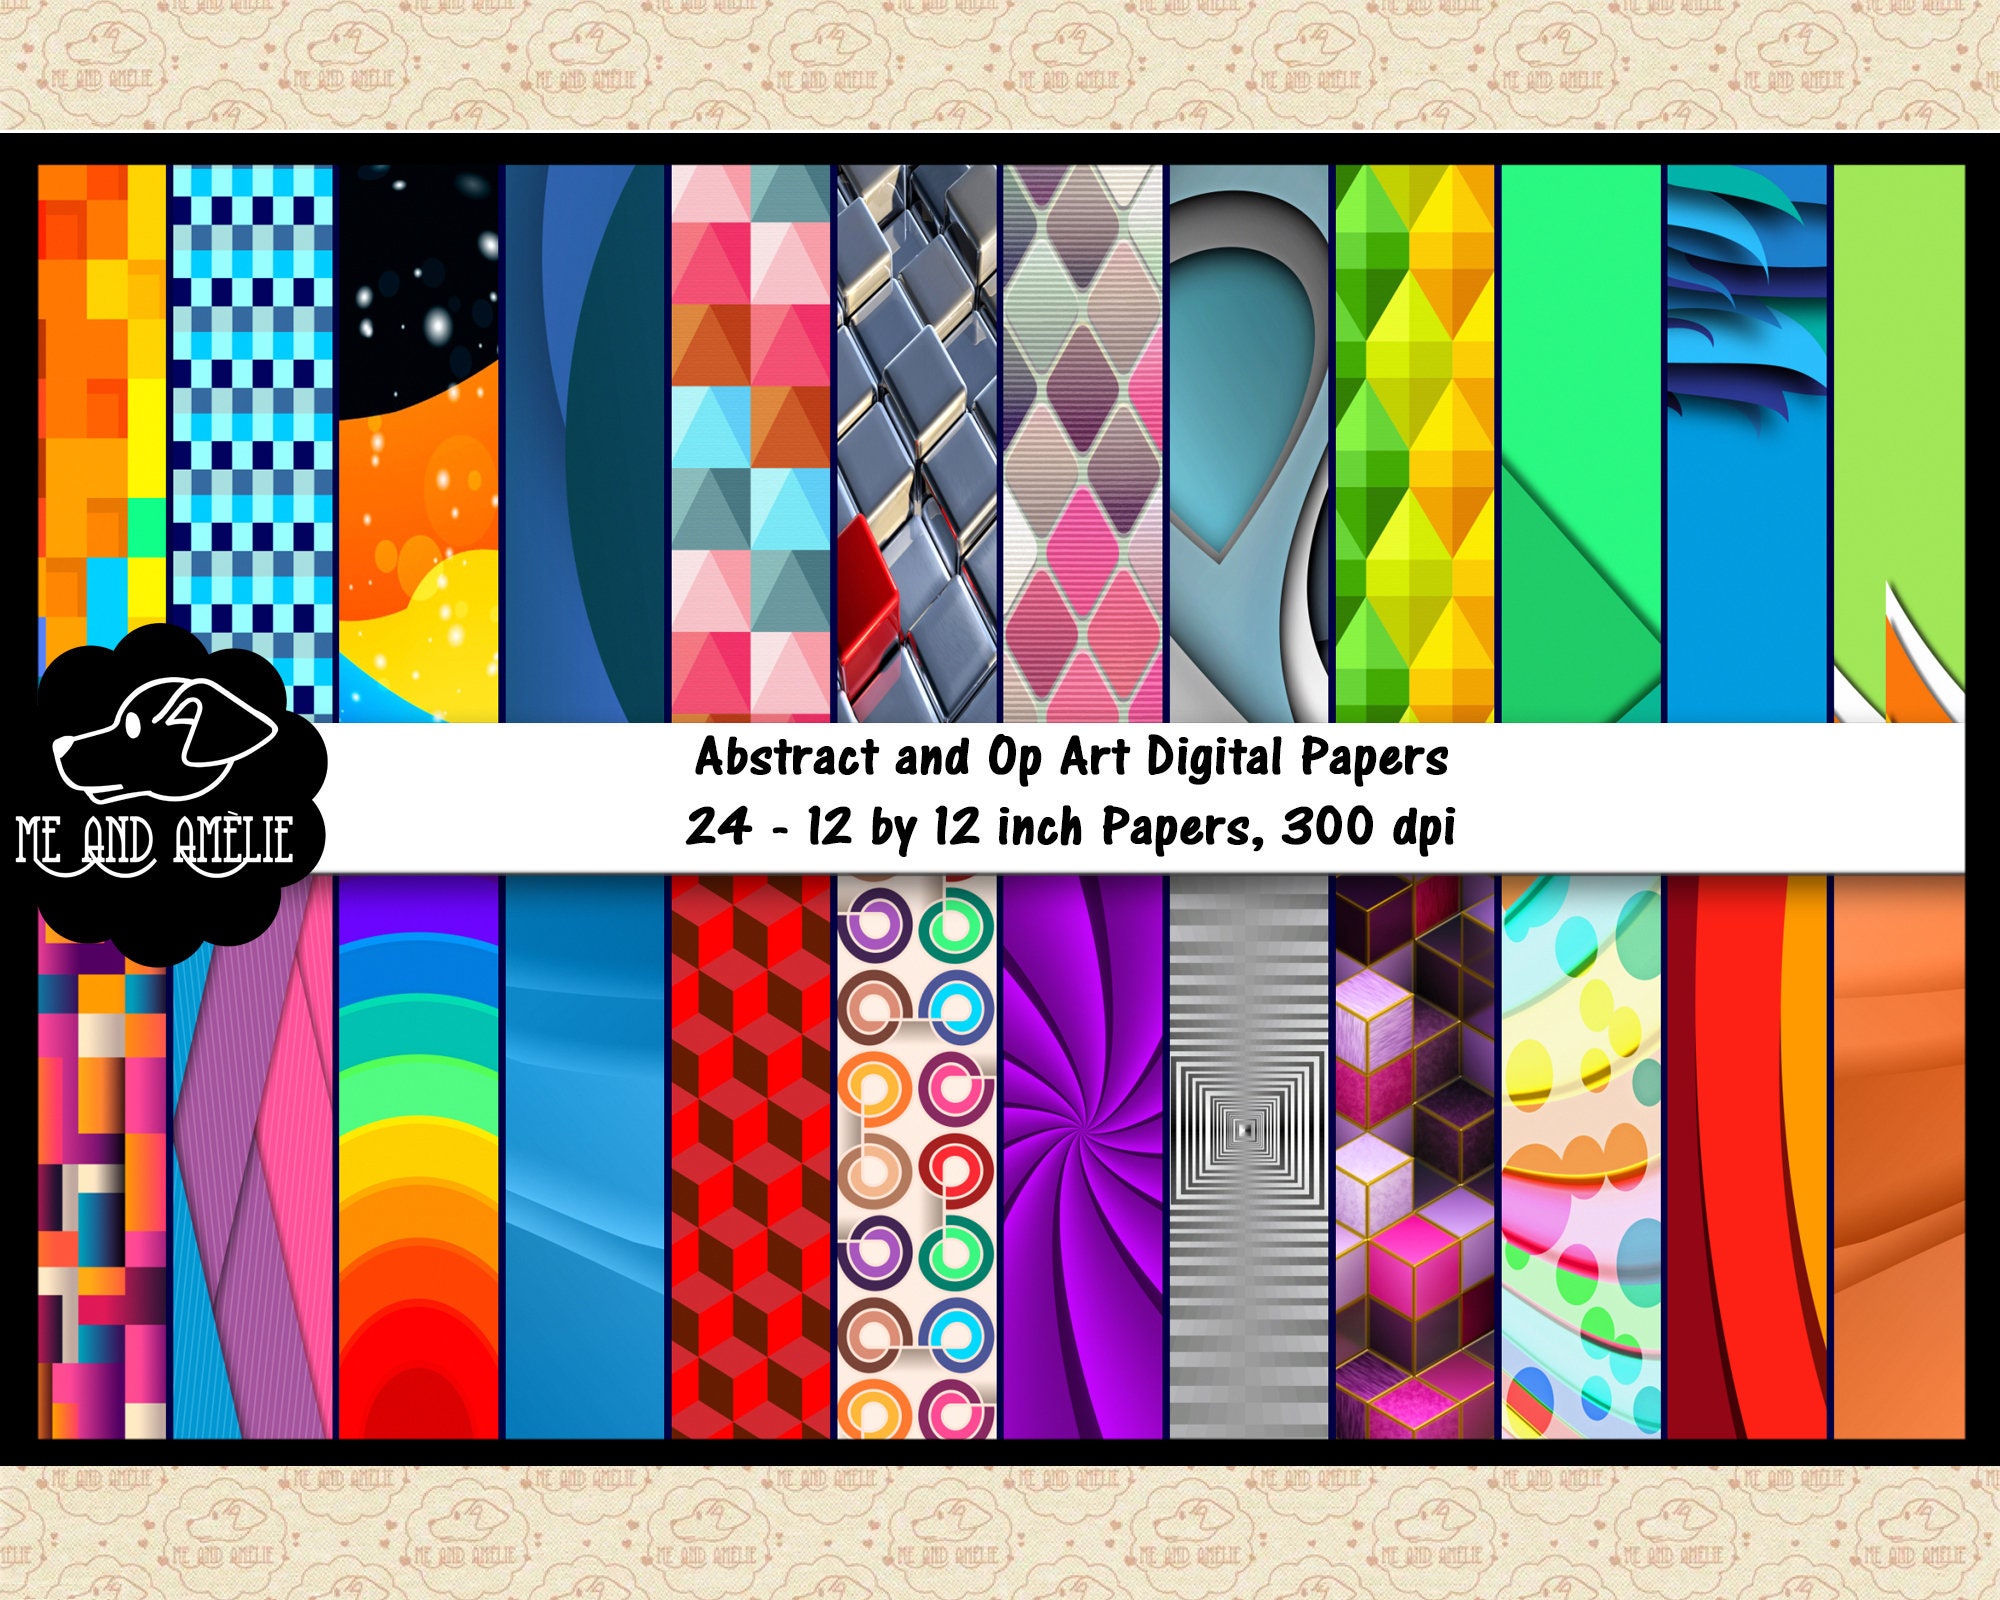 Retro Digital Paper, Op Art Patterns, Geometric Patterns, Black and White  Digital Papers, Retro Scrapbook Paper for Commercial Use 